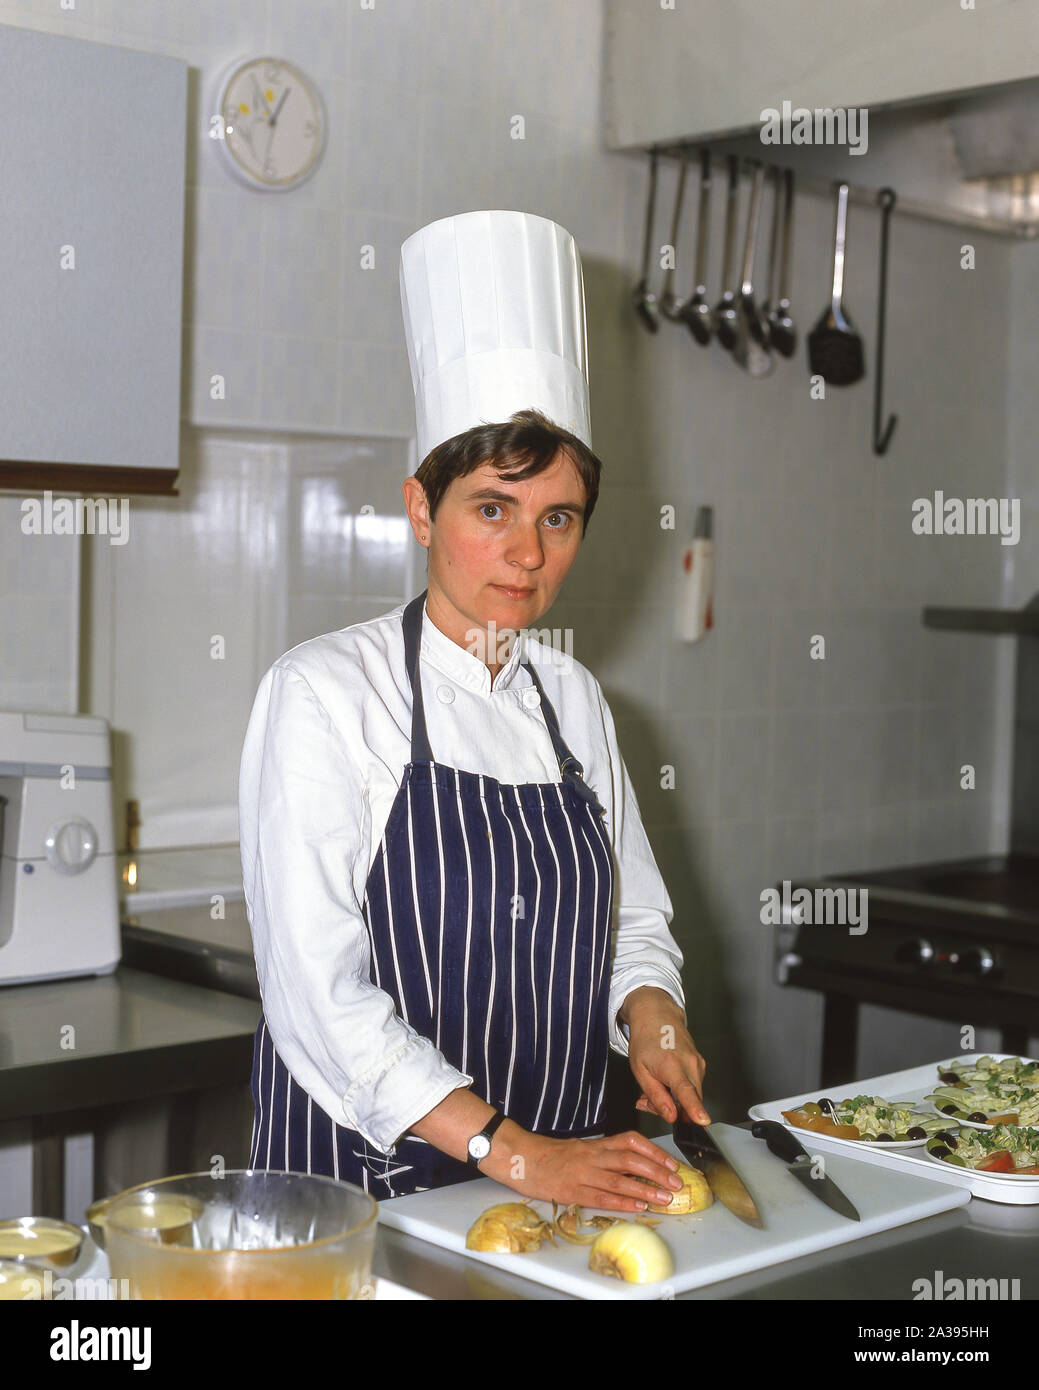 Female chef working in kitchen, Guildford, Surrey, England, United Kingdom Stock Photo